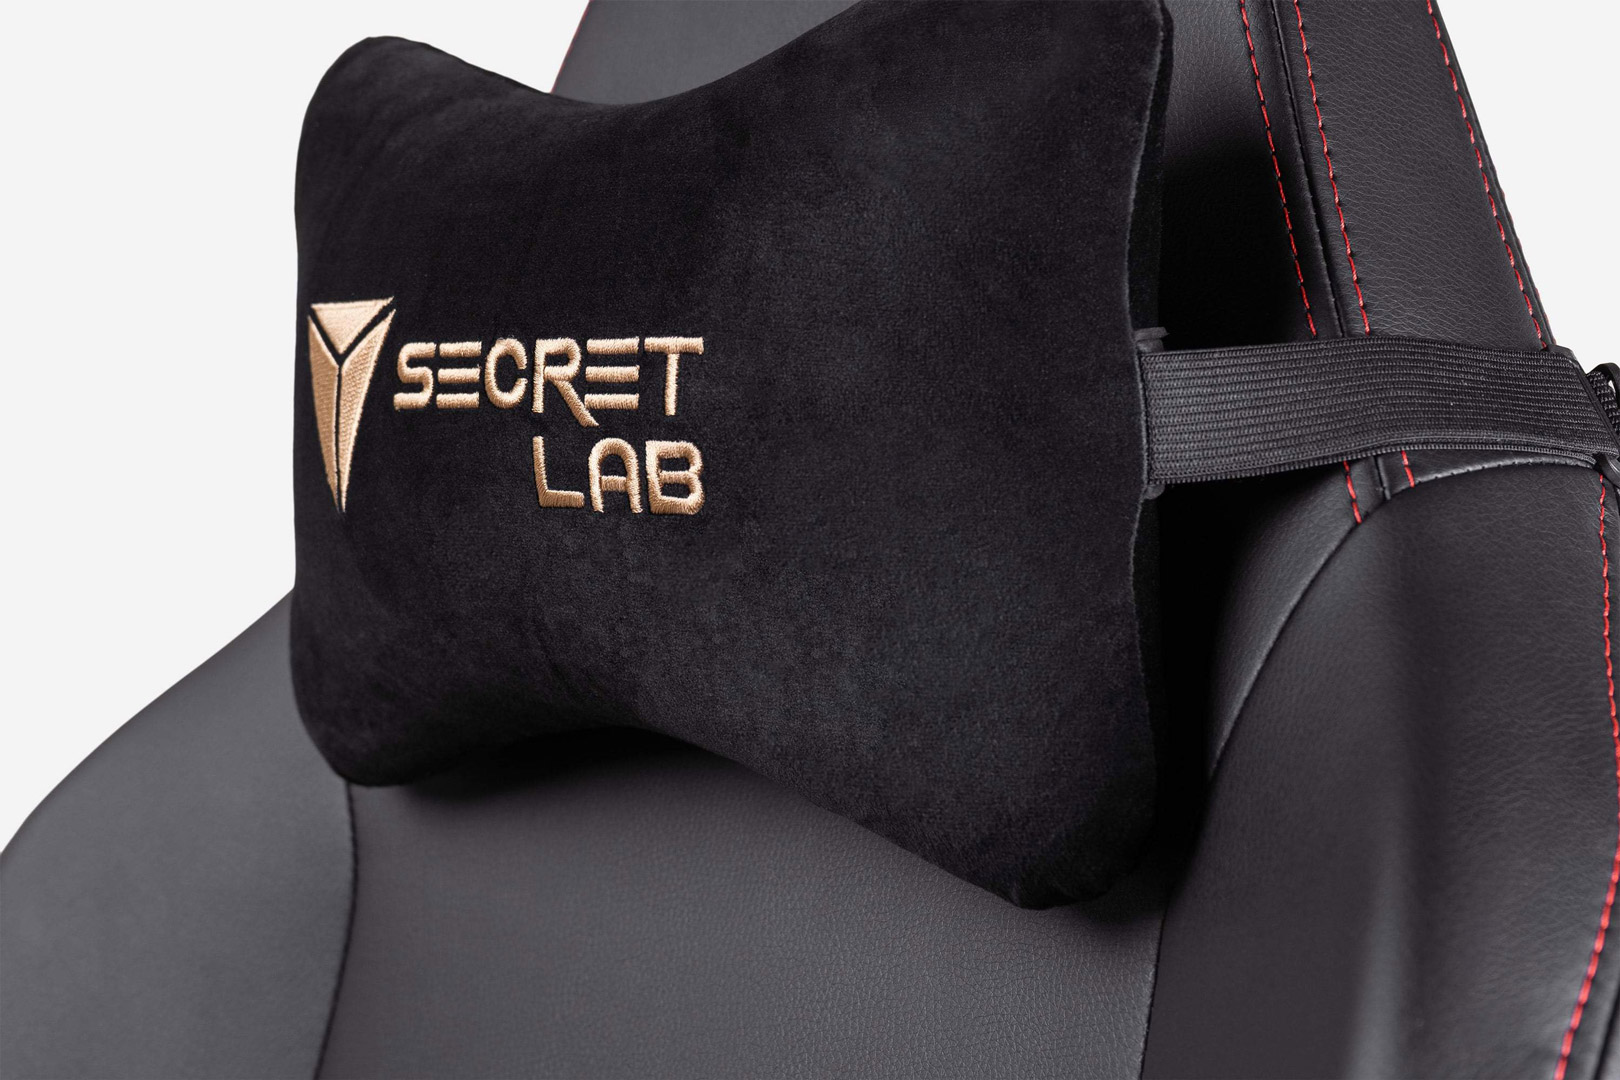 Secretlab Omega review - The all day gaming chair